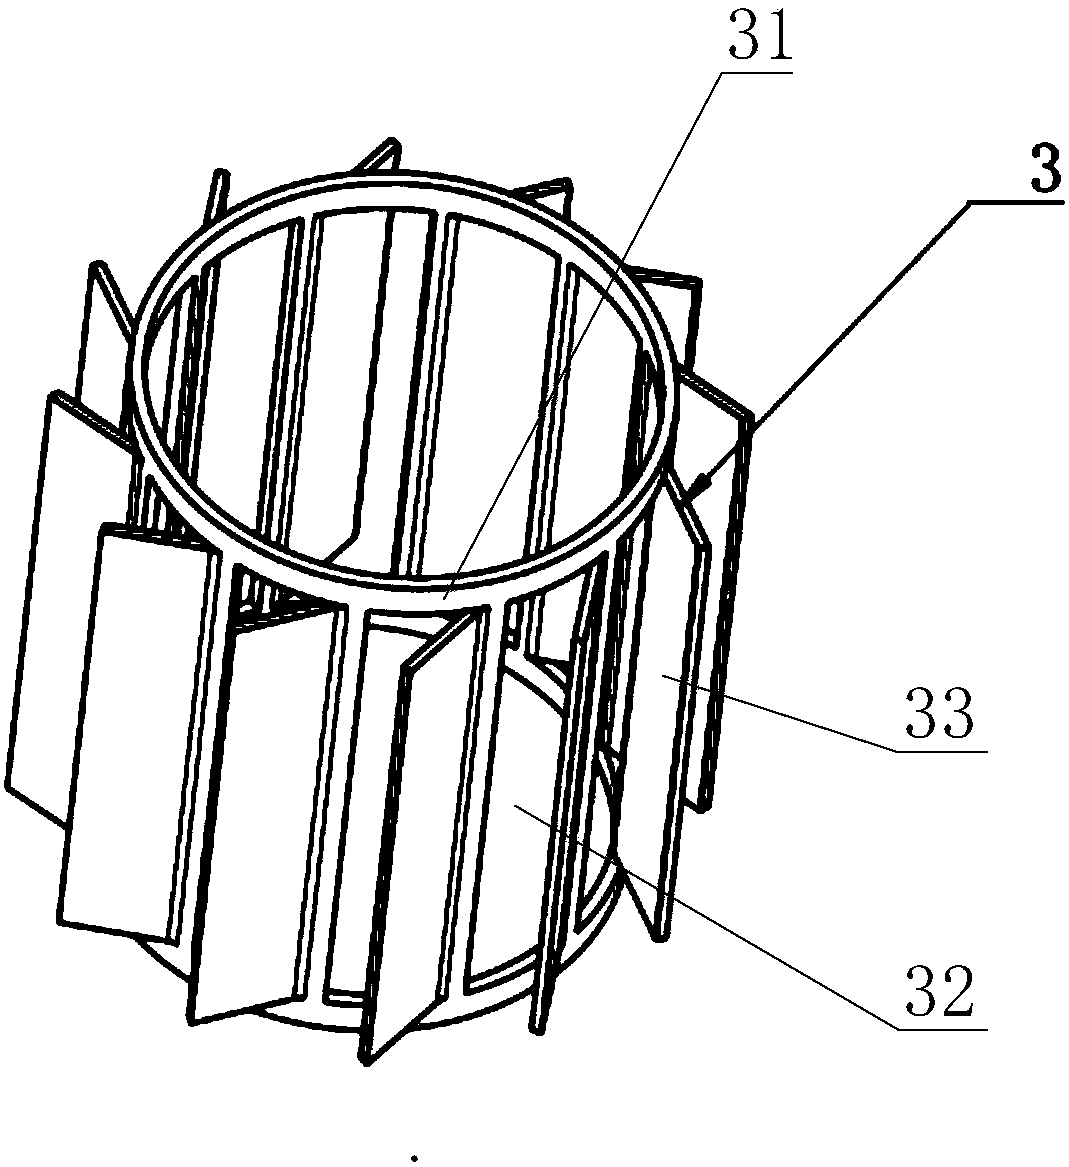 After-treatment intake mixing device